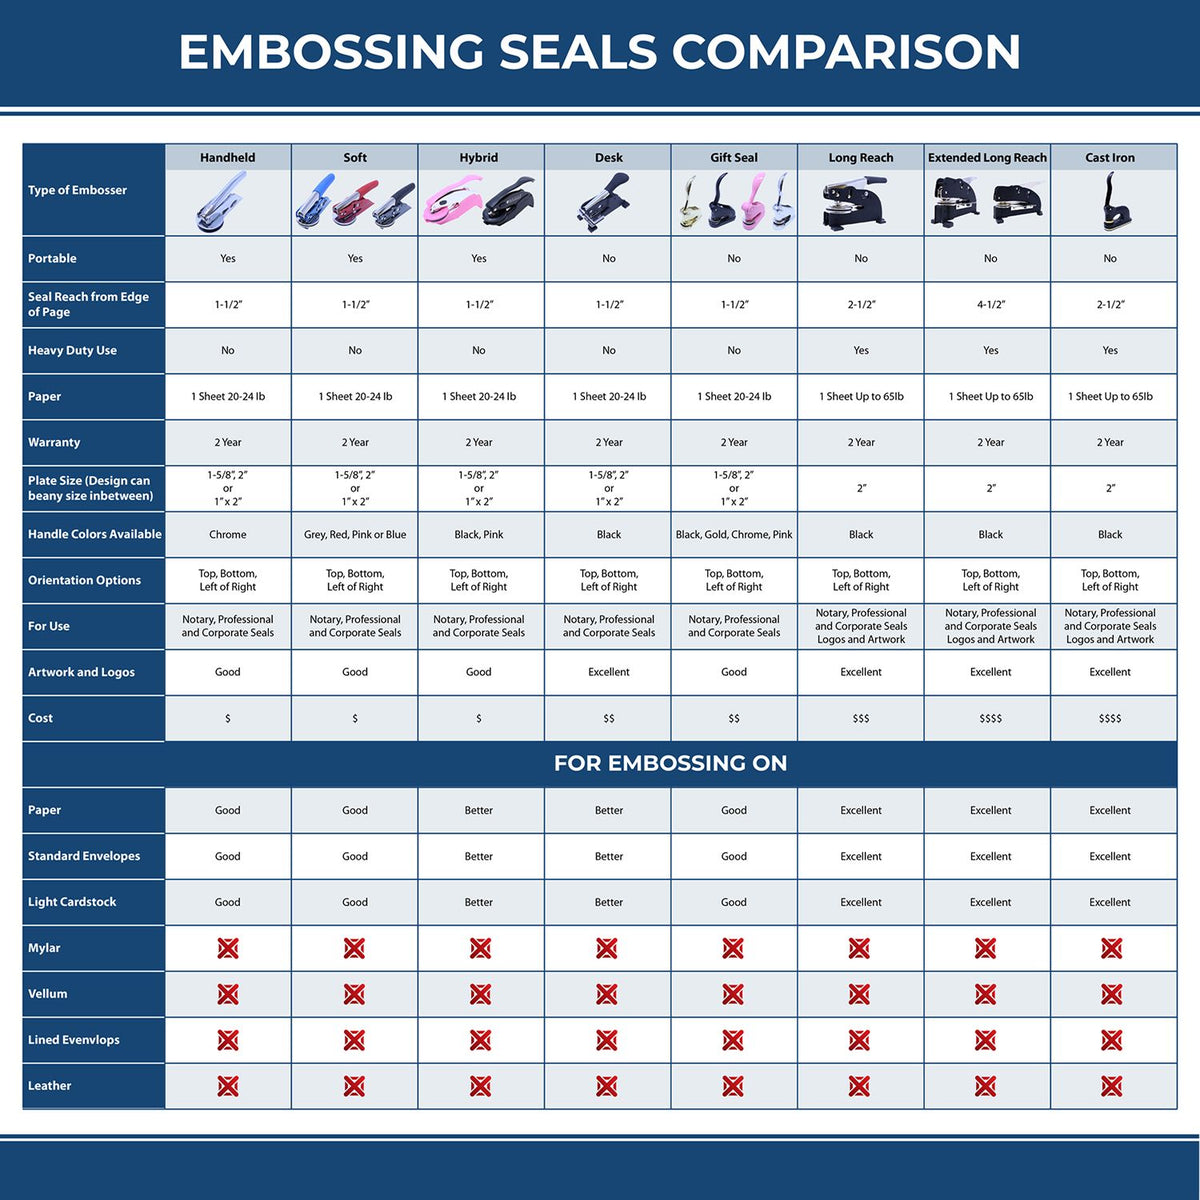 A comparison chart for the different types of mount models available for the Soft Indiana Professional Engineer Seal.